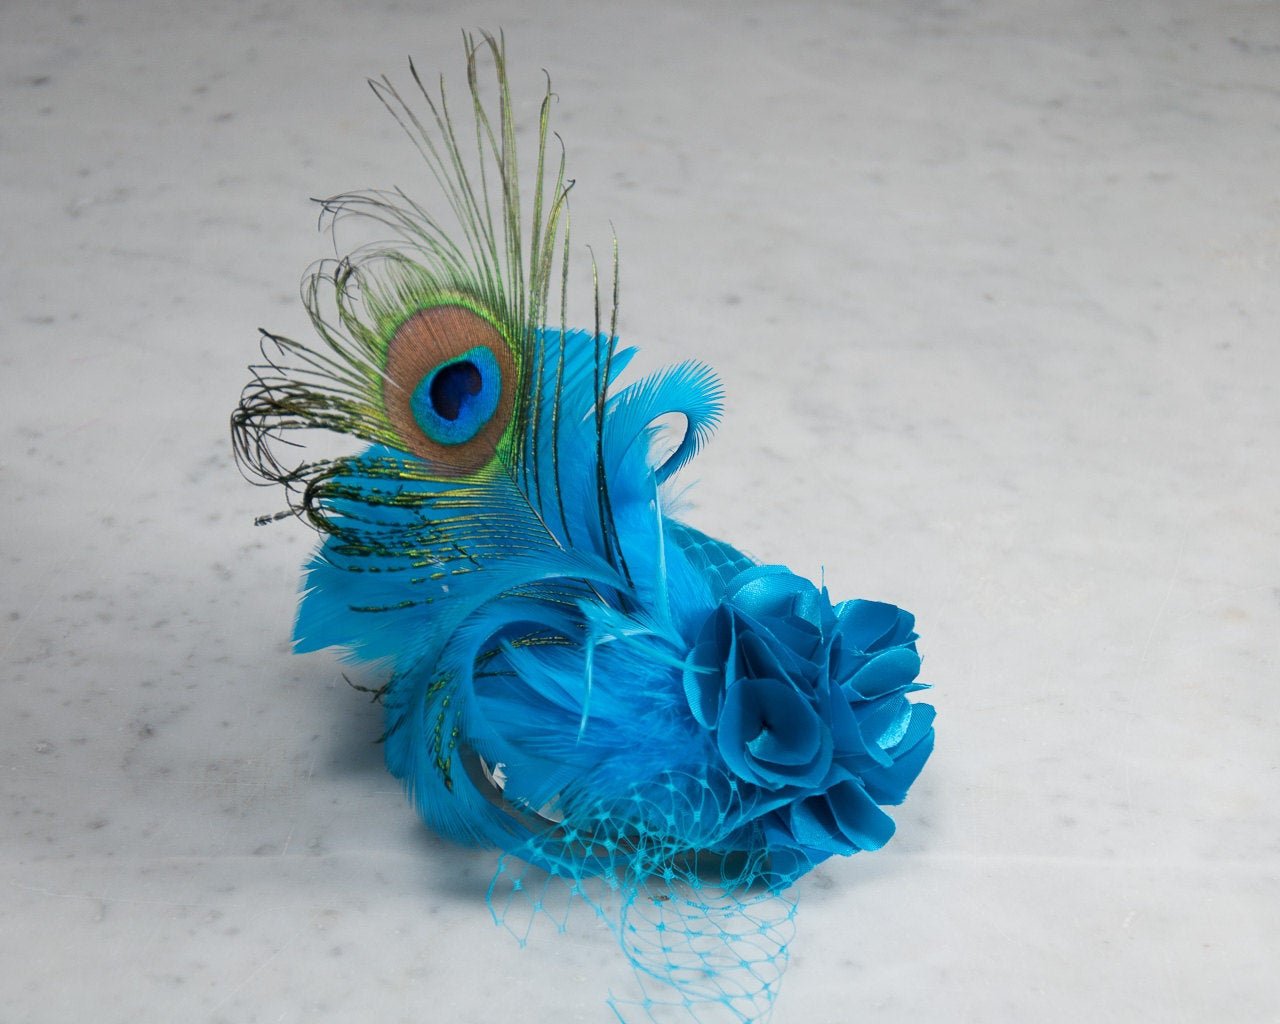 FASCINATOR - HEADDRESS IN SHINY GREEN WITH COLORED PEACOCK FEATHER © Seegang Berlin